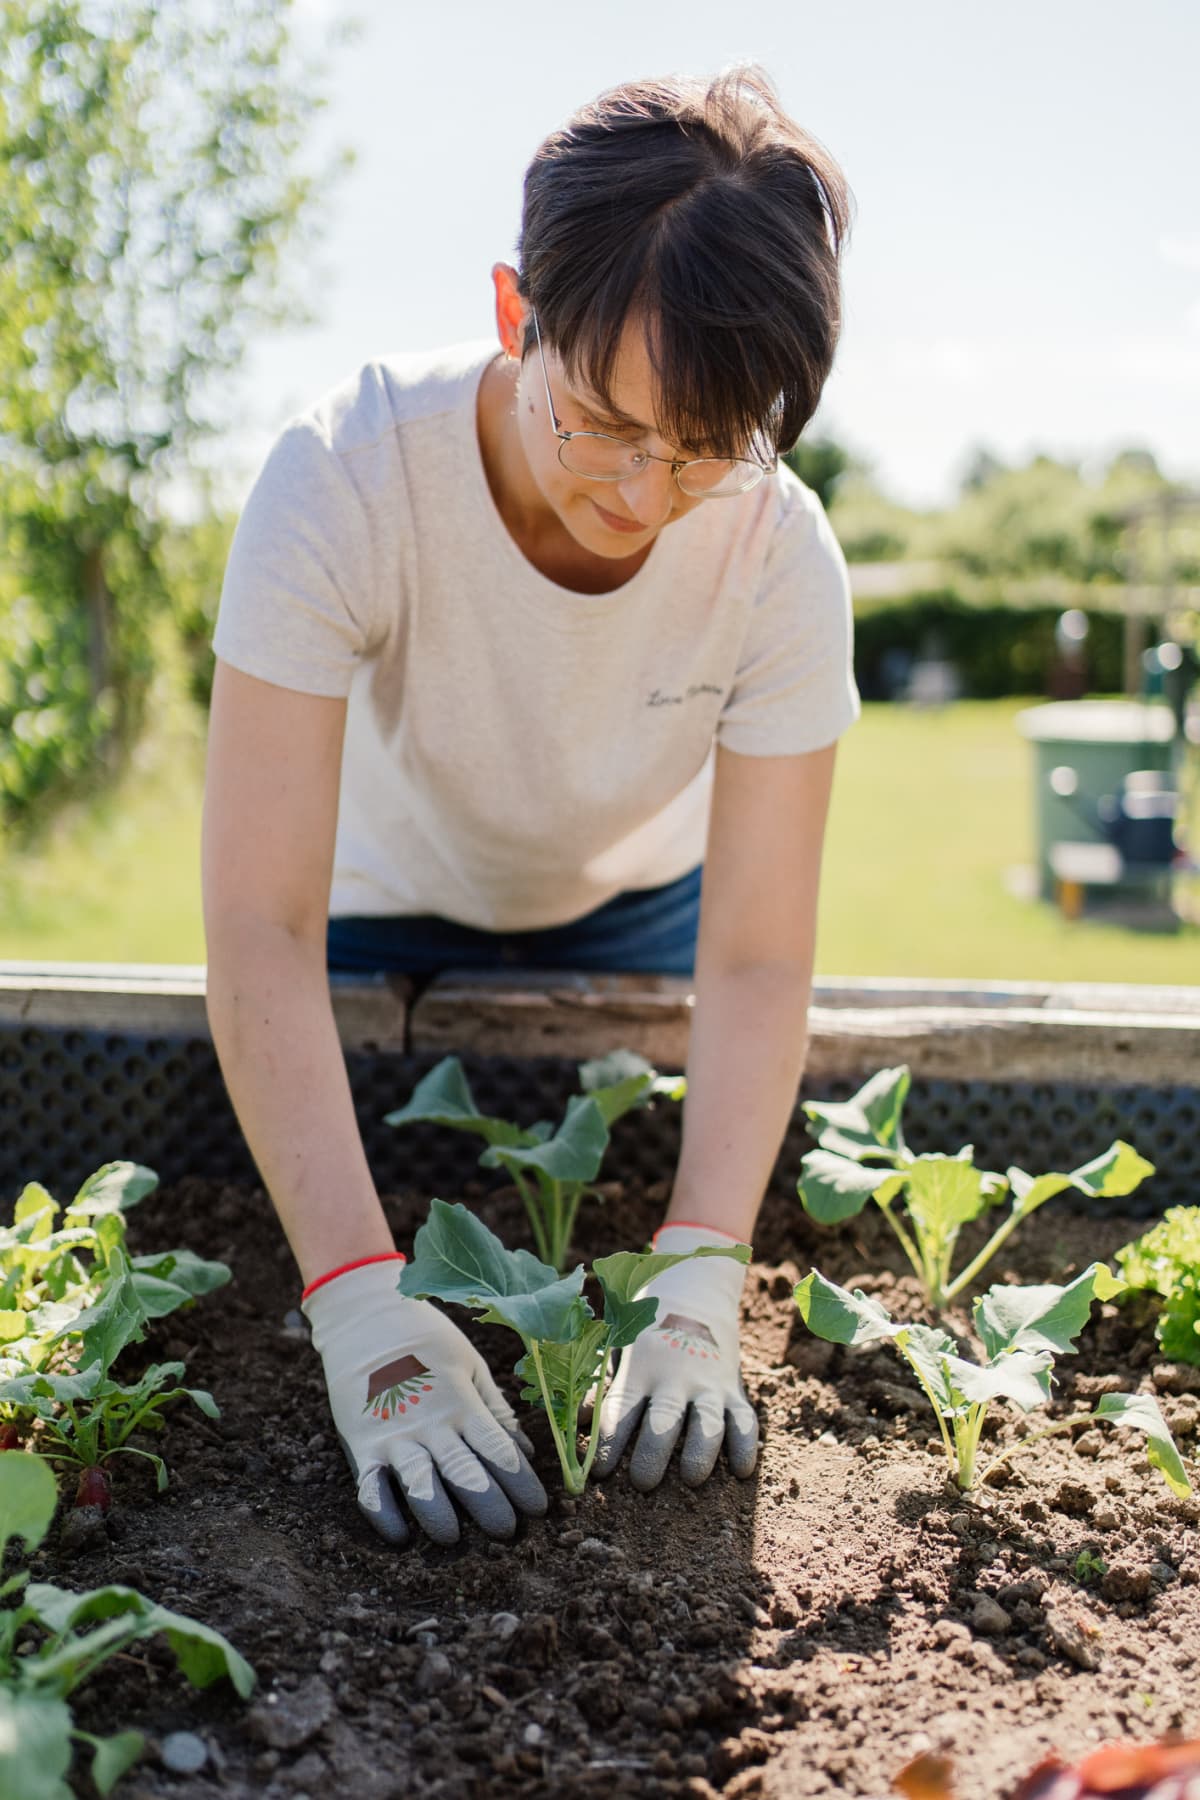 Young gardener wearing gloves and working in a raised garden bed